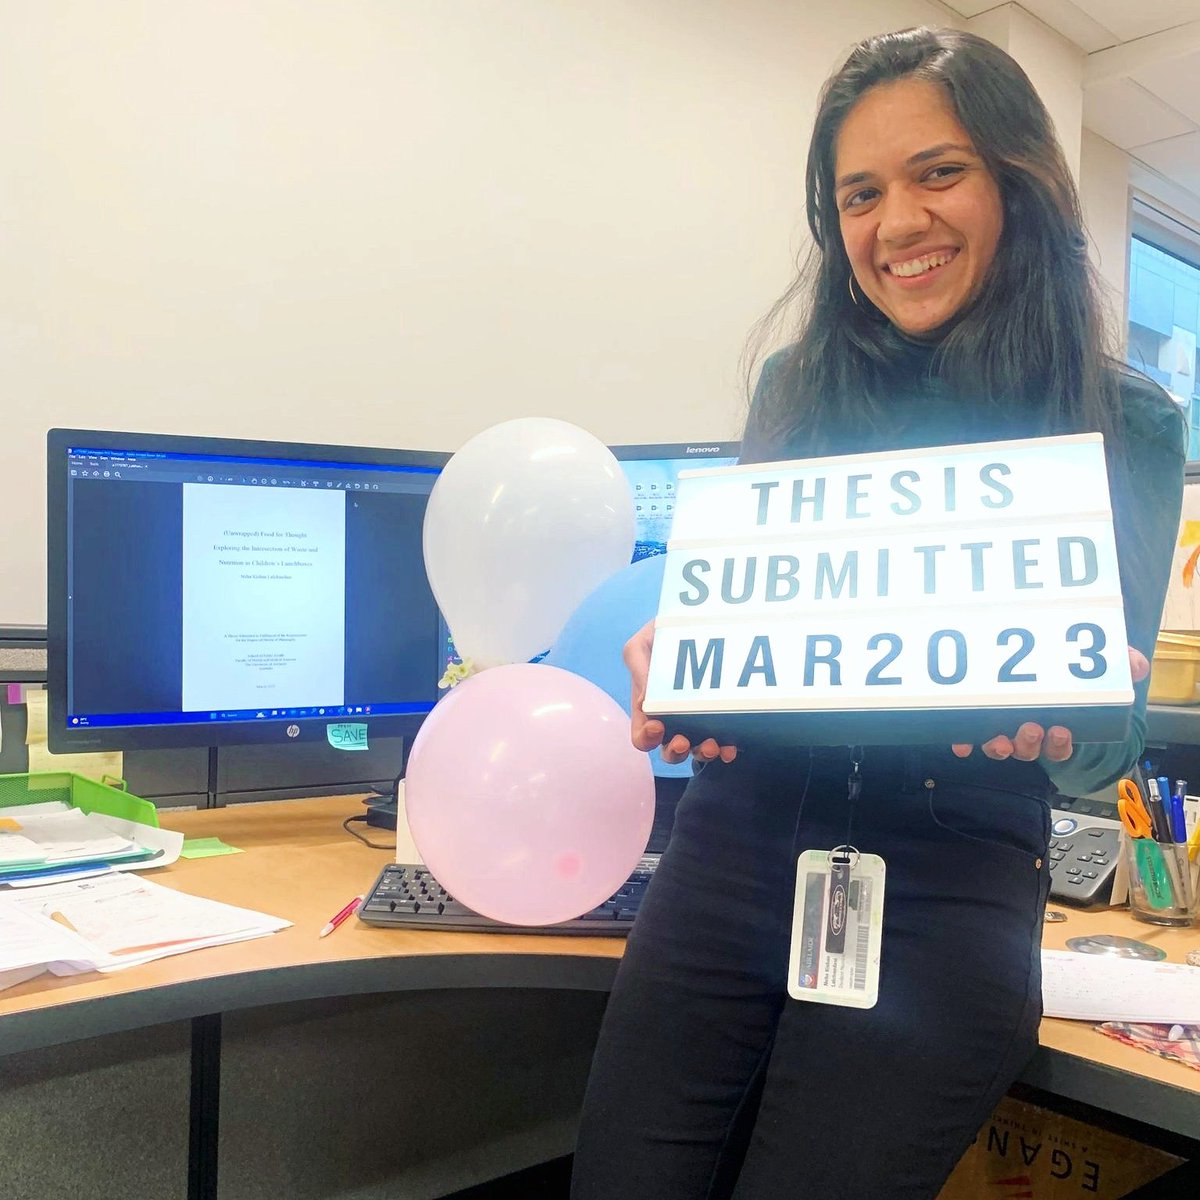 🎈 it's April Fools' Day eve, but this is no joke. It's real and absolutely amazing: huge congratulations Neha Kishan Lalchandani @lunchboxpixie for submitting your thesis 🥳🎉👏. We wish you all the very best for your future endeavours. 🍀😊